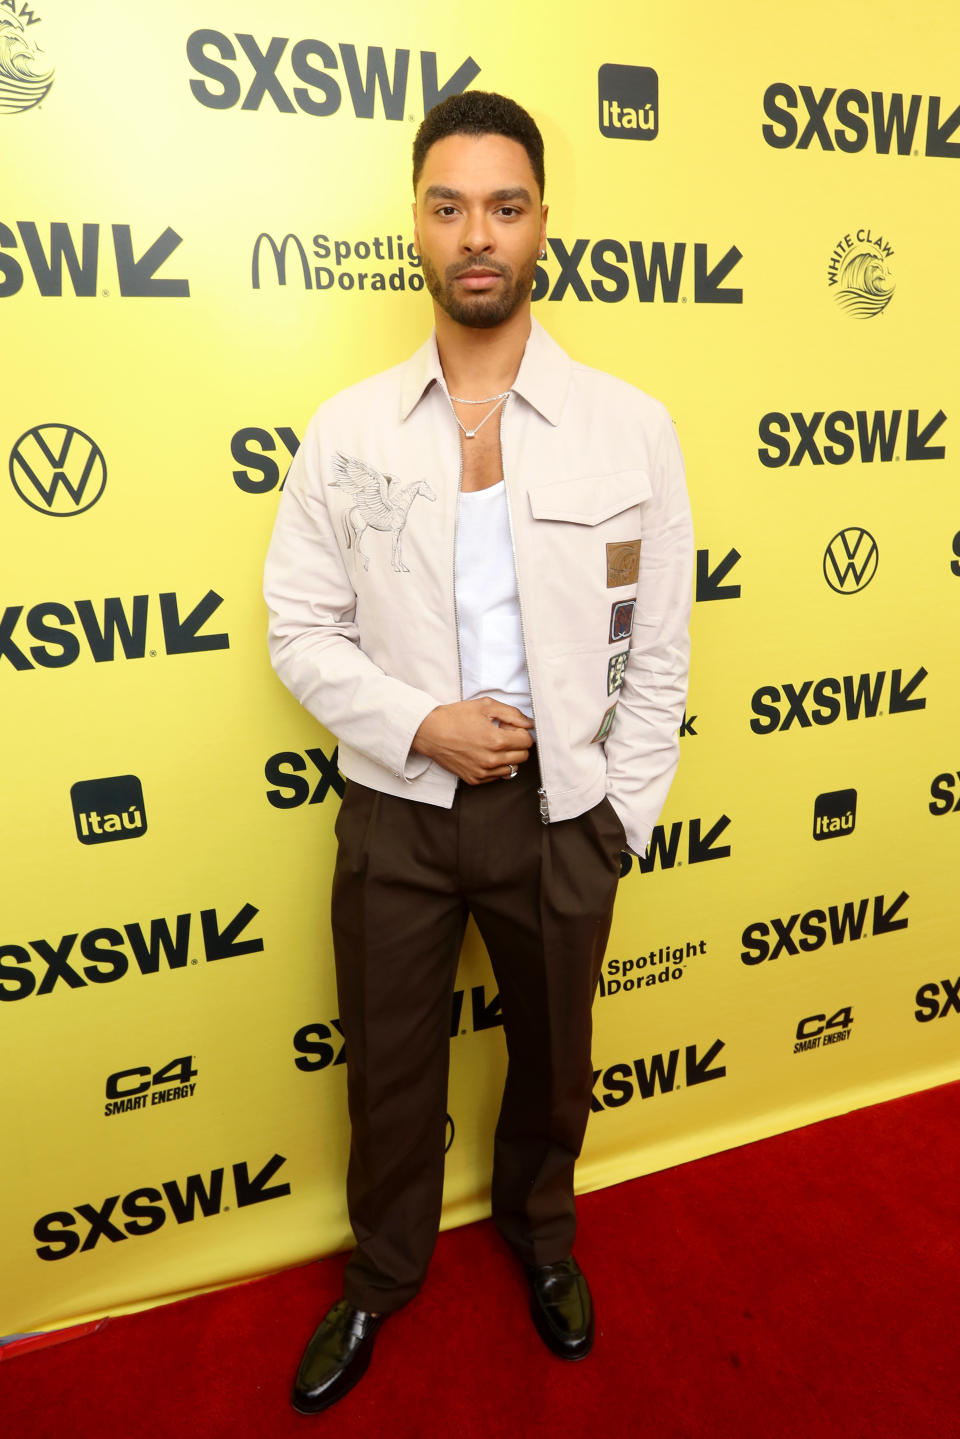 AUSTIN, TEXAS - MARCH 10: Regé-Jean Page attends the World Premiere screening of Paramount Pictures and eOne's “Dungeons & Dragons: Honor Among Thieves” at the 2023 SXSW Film Festival on March 10, 2023 in Austin, Texas. (Photo by Sarah Kerver/Getty Images for Paramount Pictures)